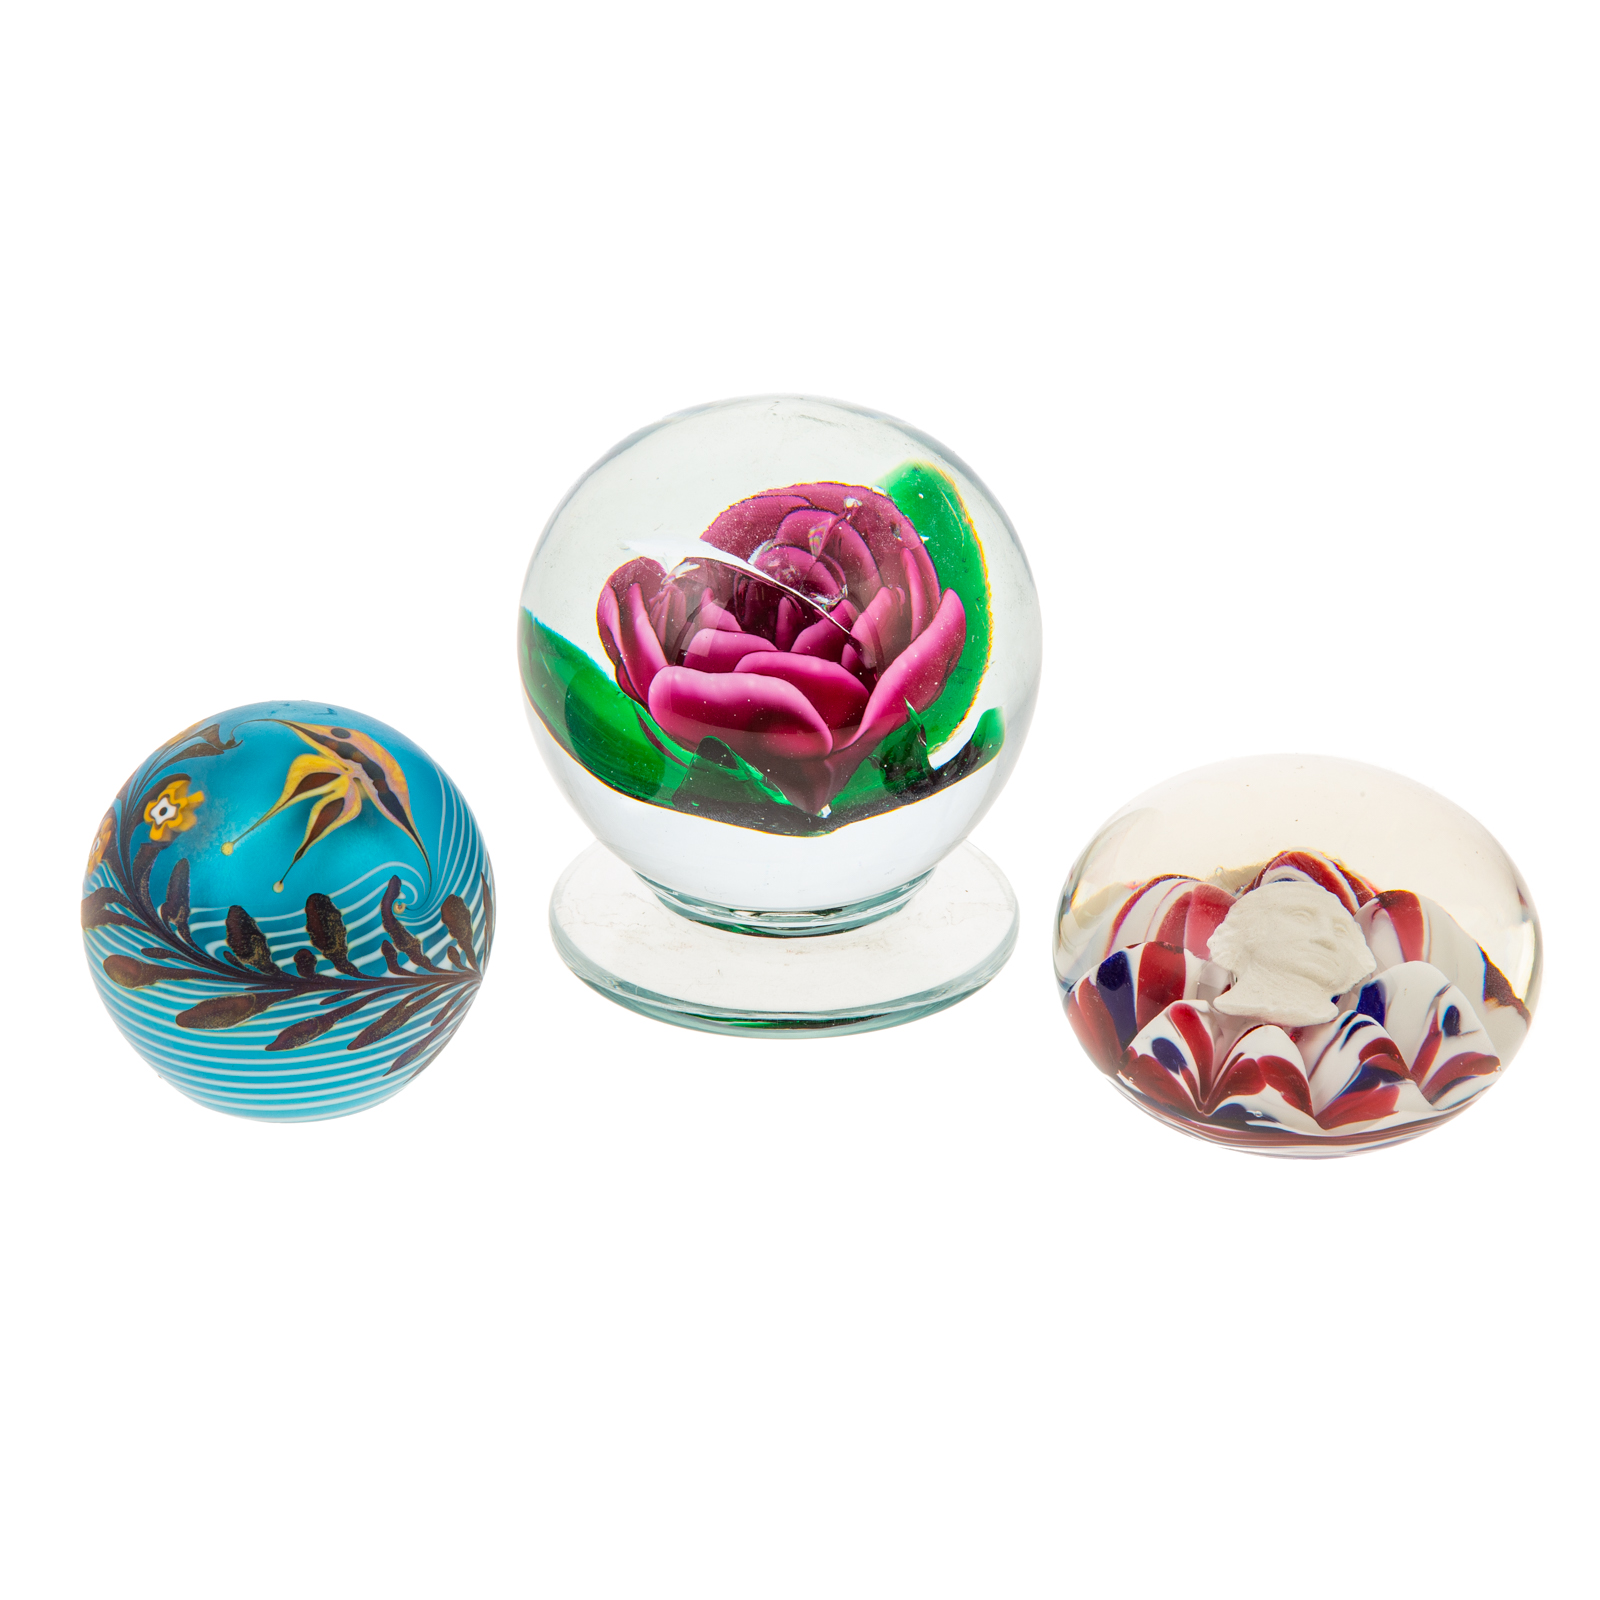 THREE ART GLASS PAPERWEIGHTS Includes